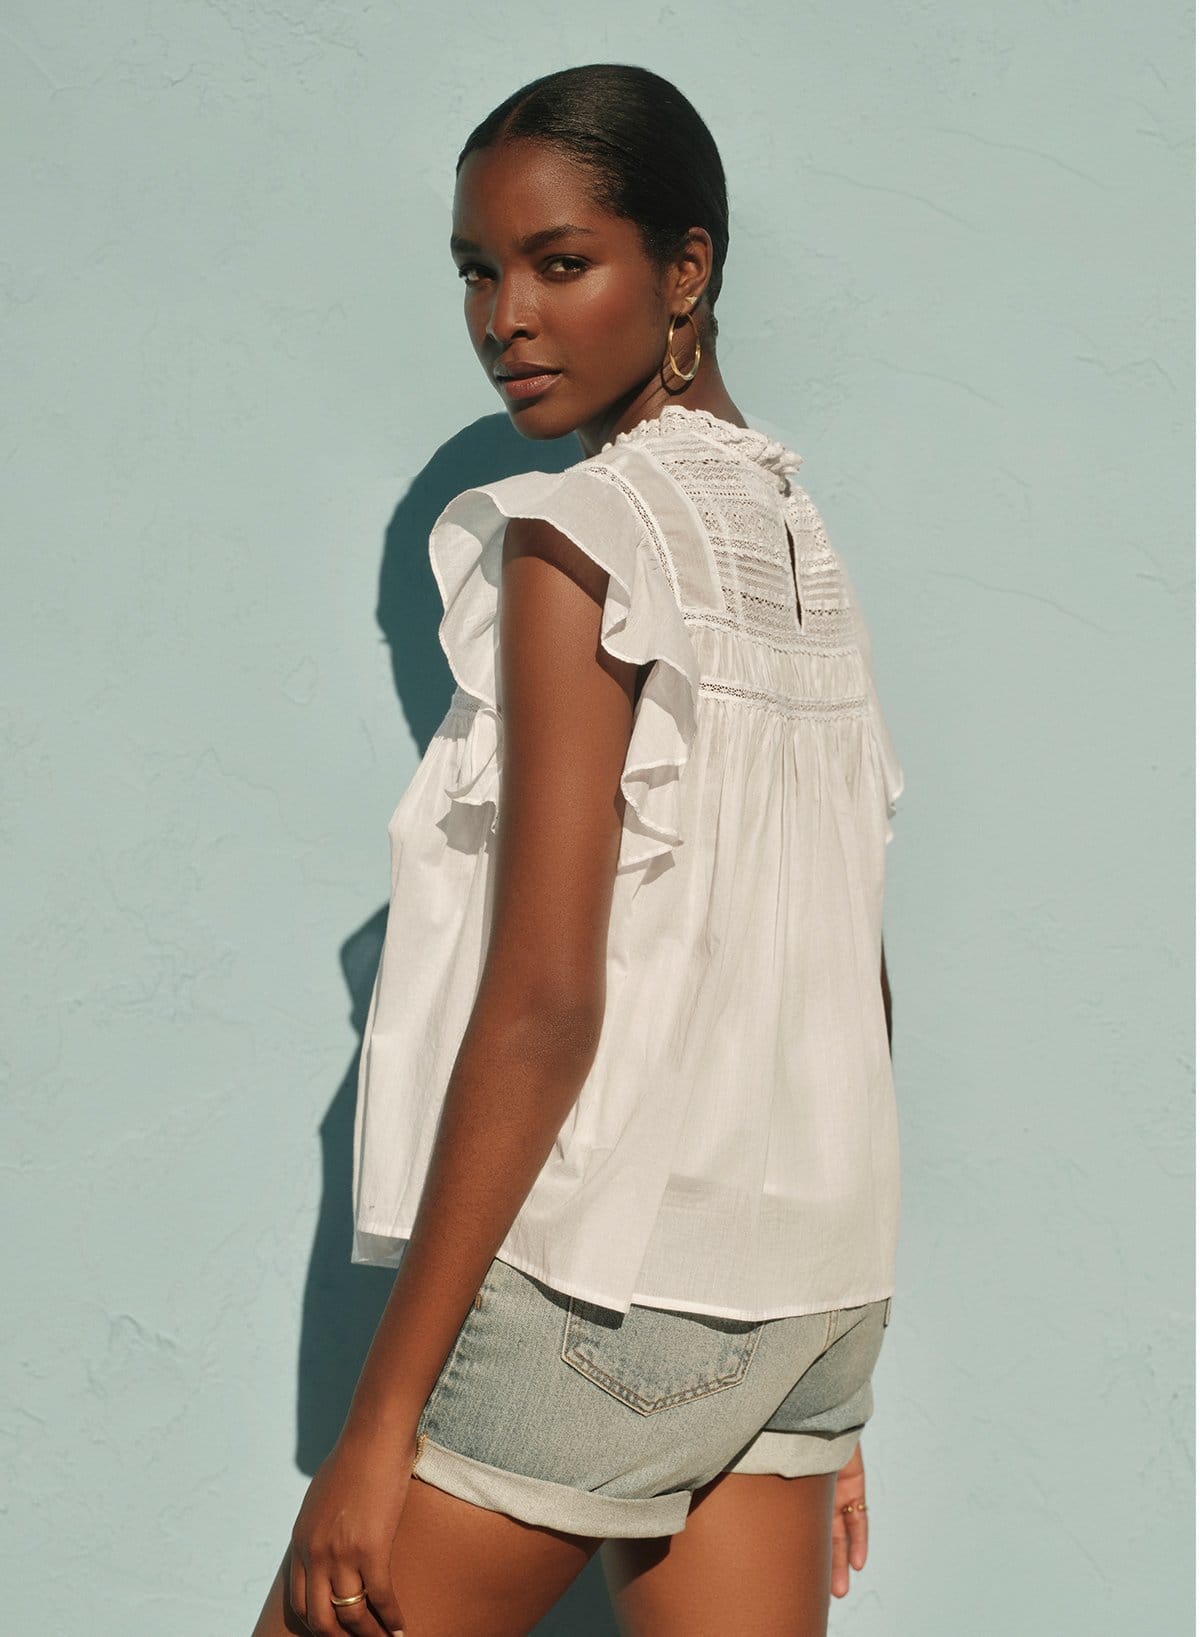 Model wearing the Inessa Cotton Lace Top in White